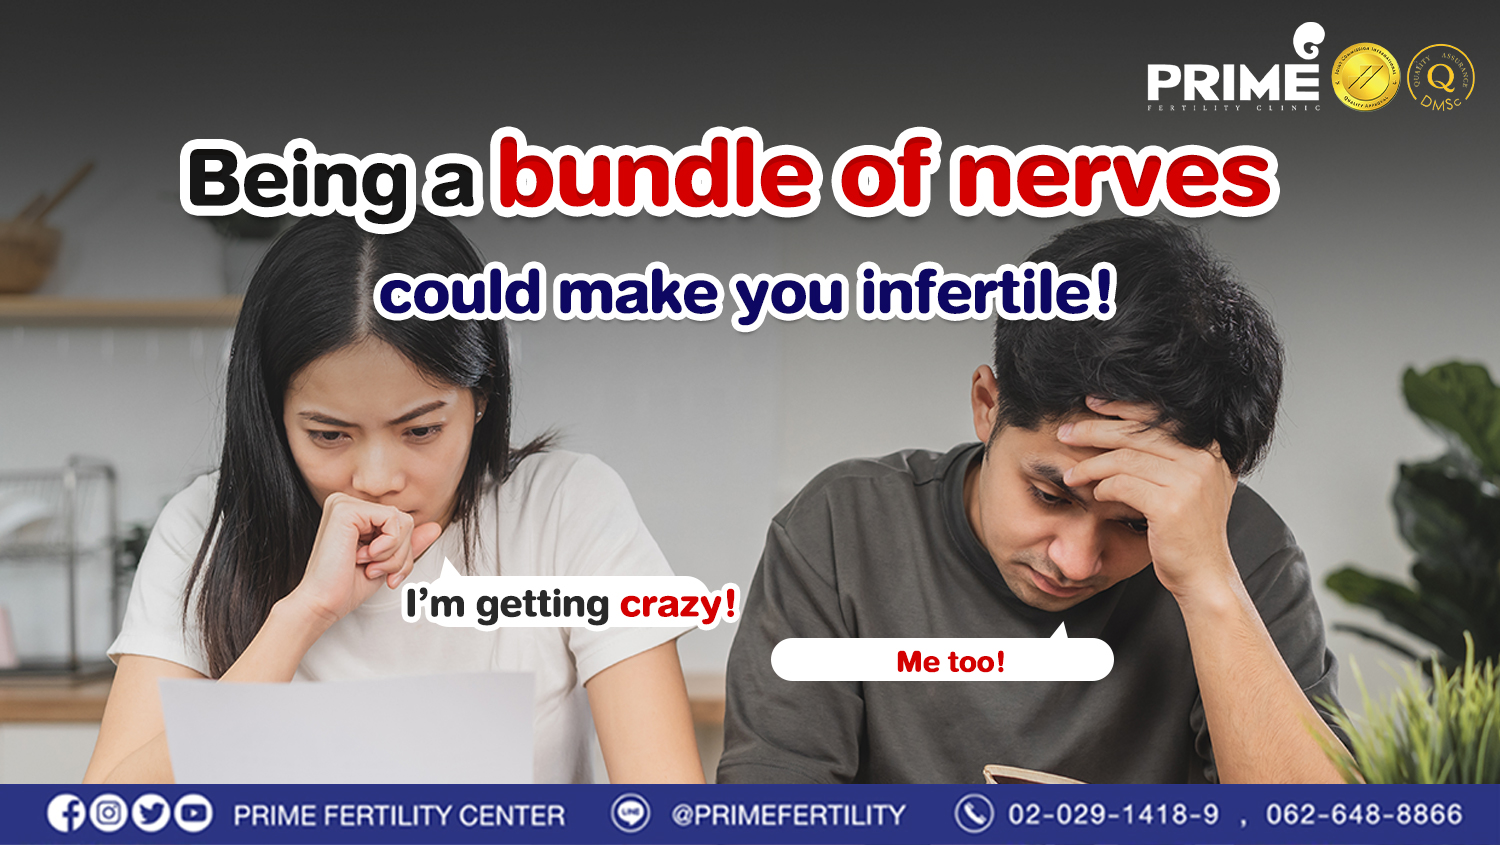 Being a bundle of nerves could make you infertile! 